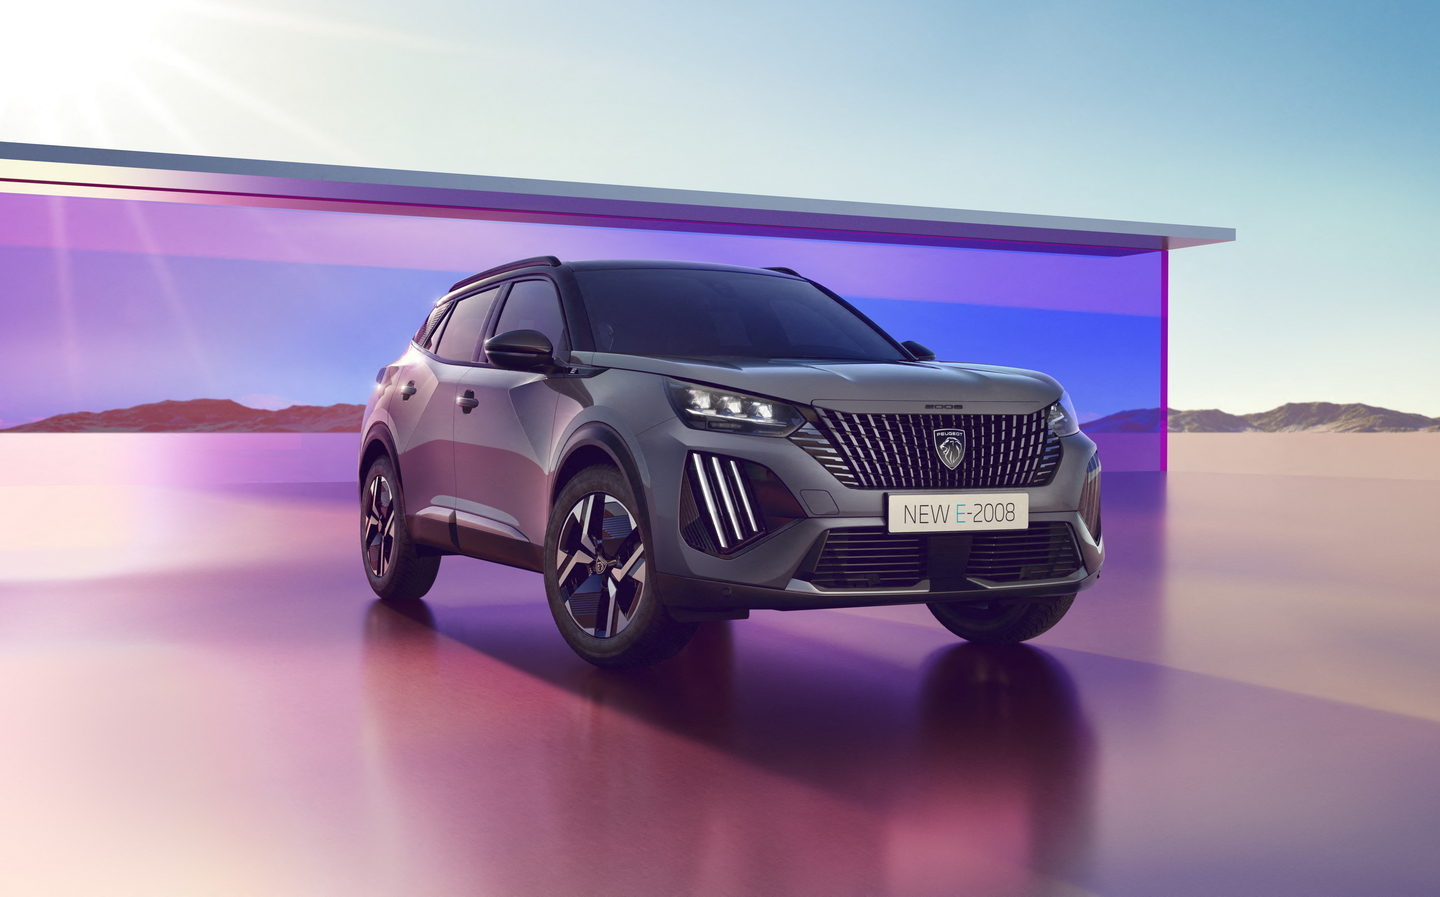 2008, e-2008, electric cars, facelifts, mild-hybrid, peugeot, peugeot 2008 updated, electric e-2008 given more range in refresh of french crossover